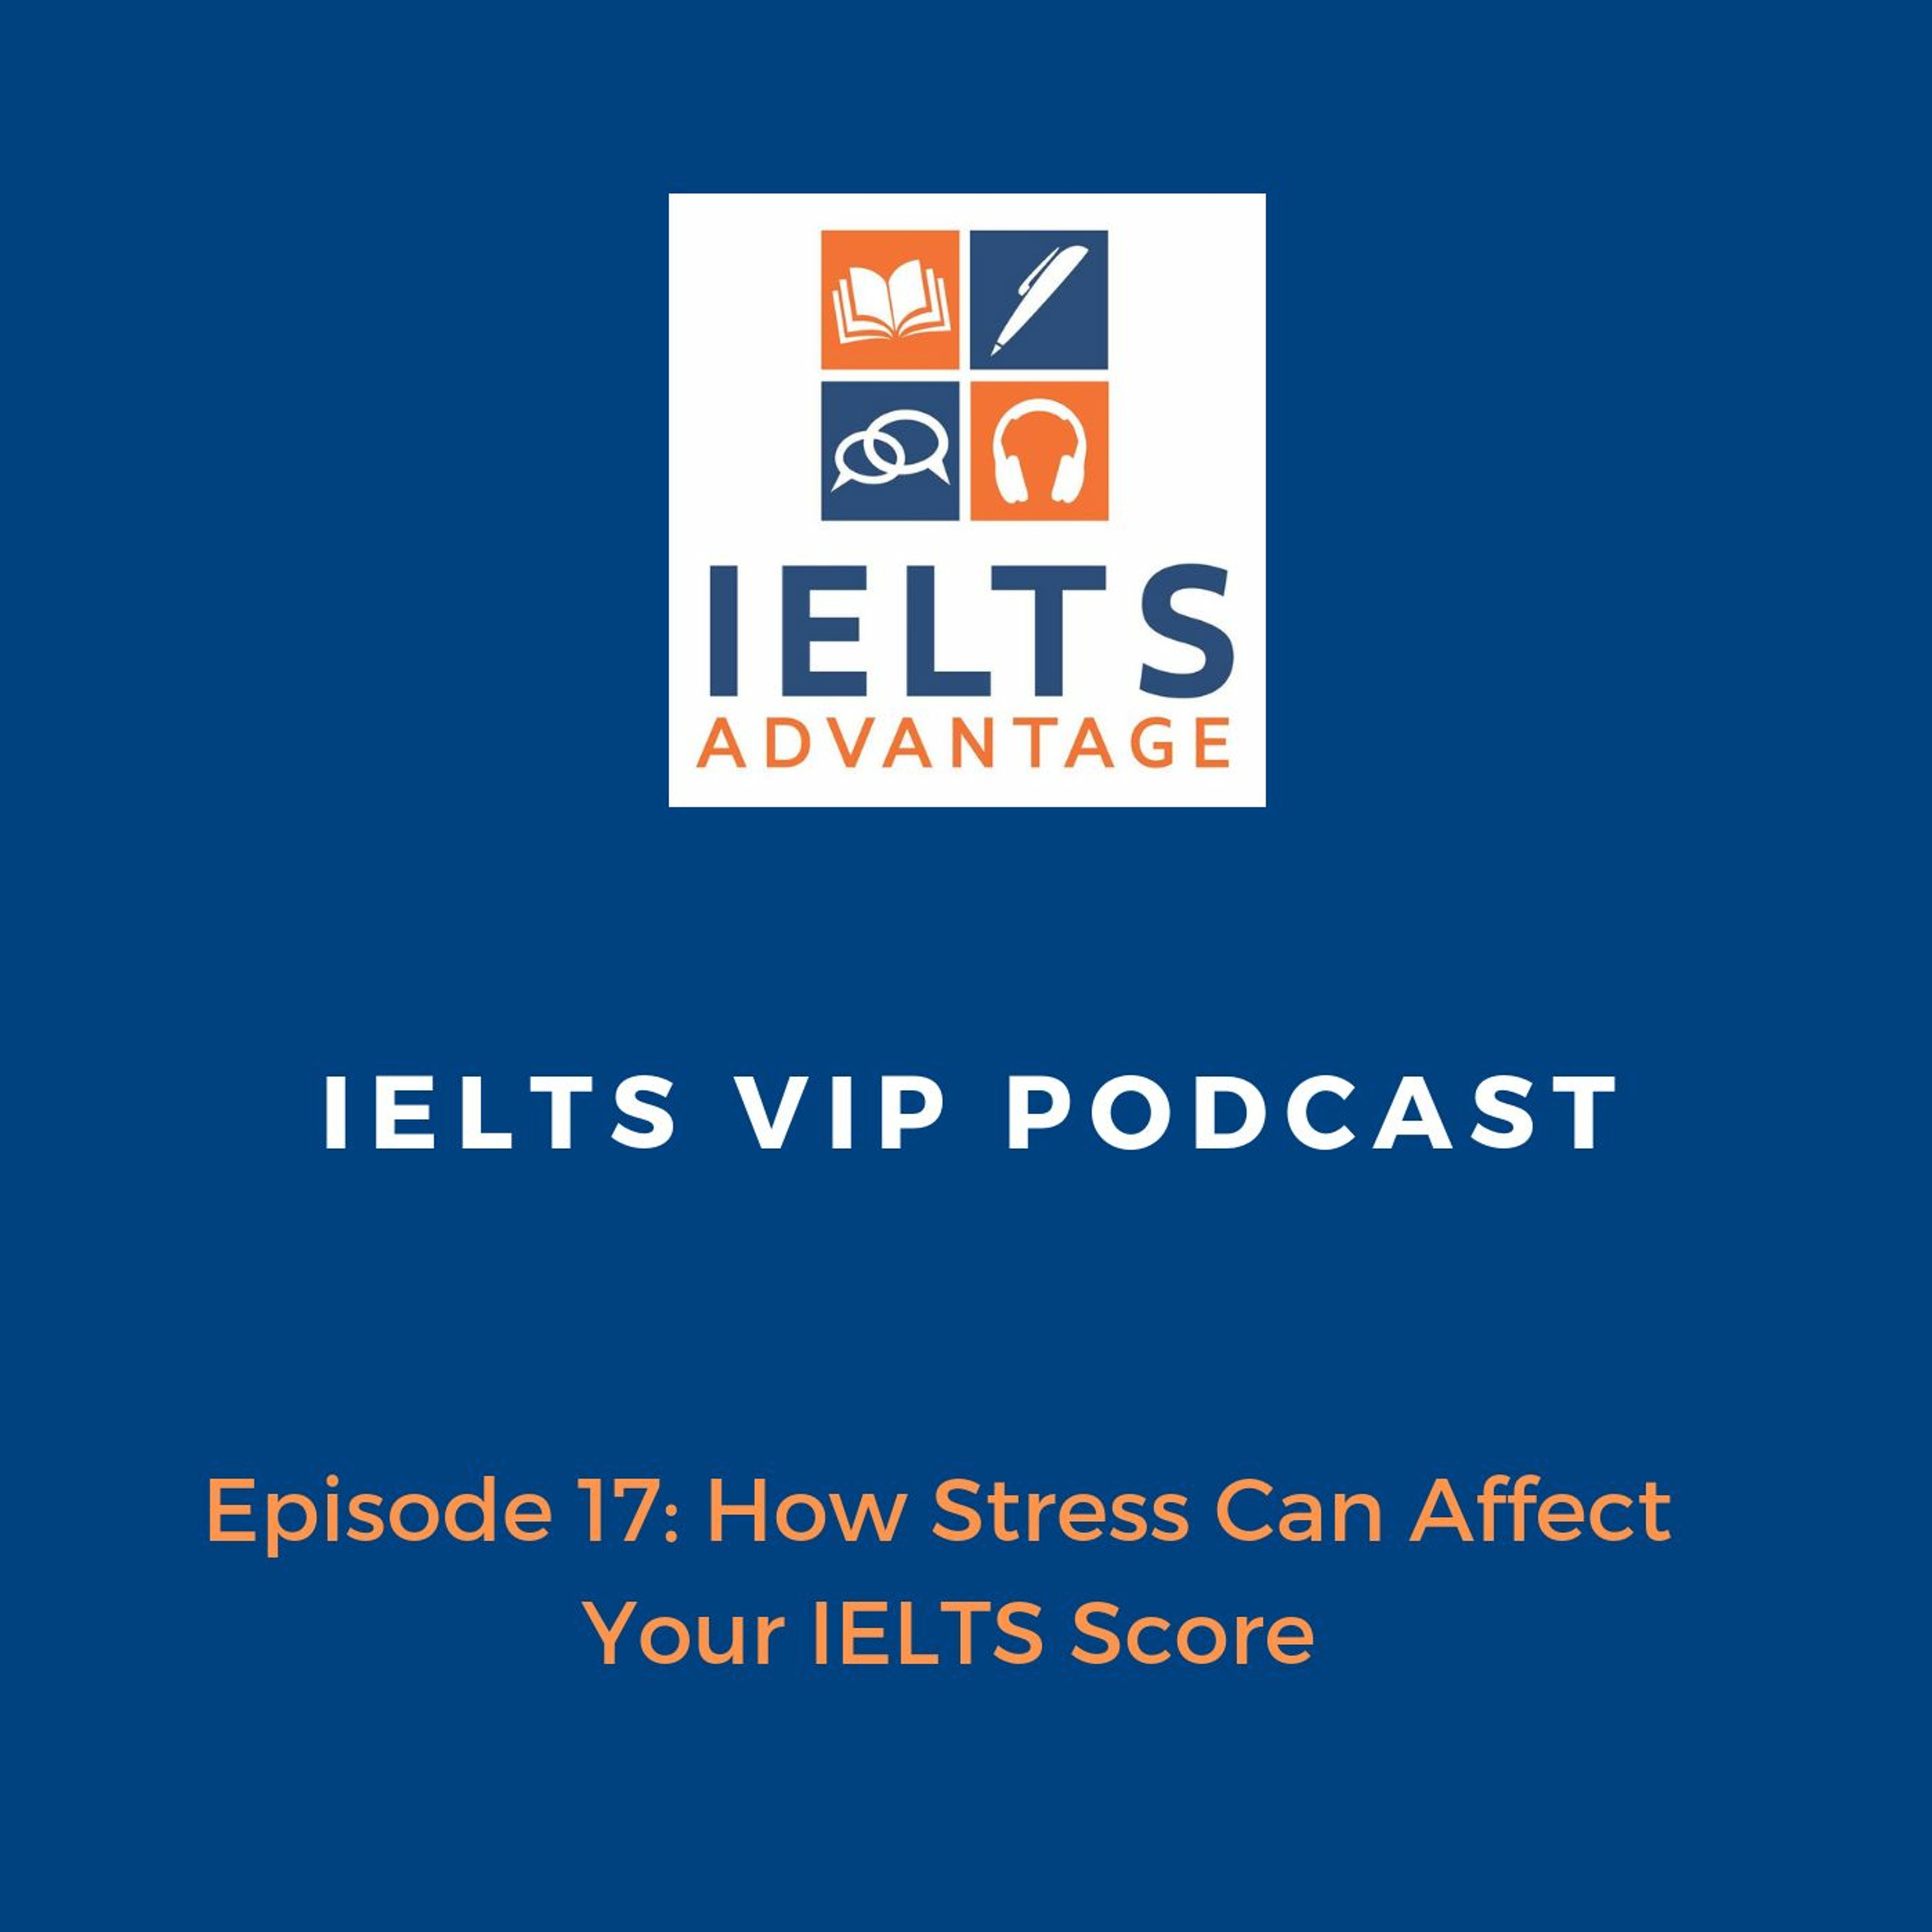 Episode 17: How Stress Can Affect Your IELTS Score